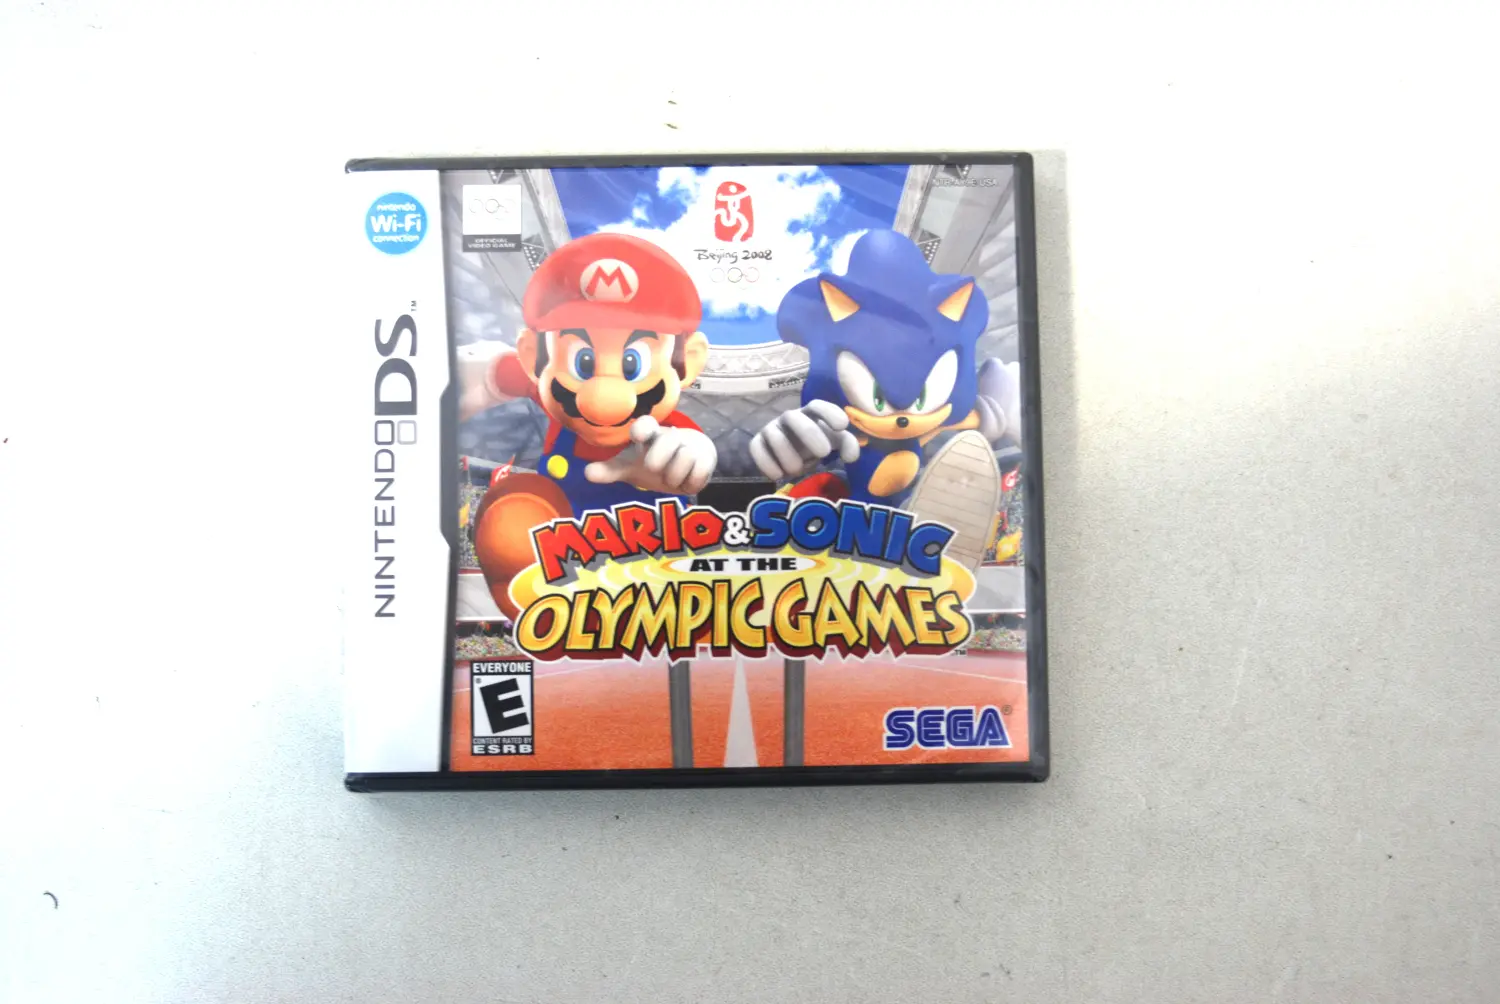 jeu DS mario & sonic AT THE OLYMPIC GAMES - version anglais - Emmaüs  Toulouse